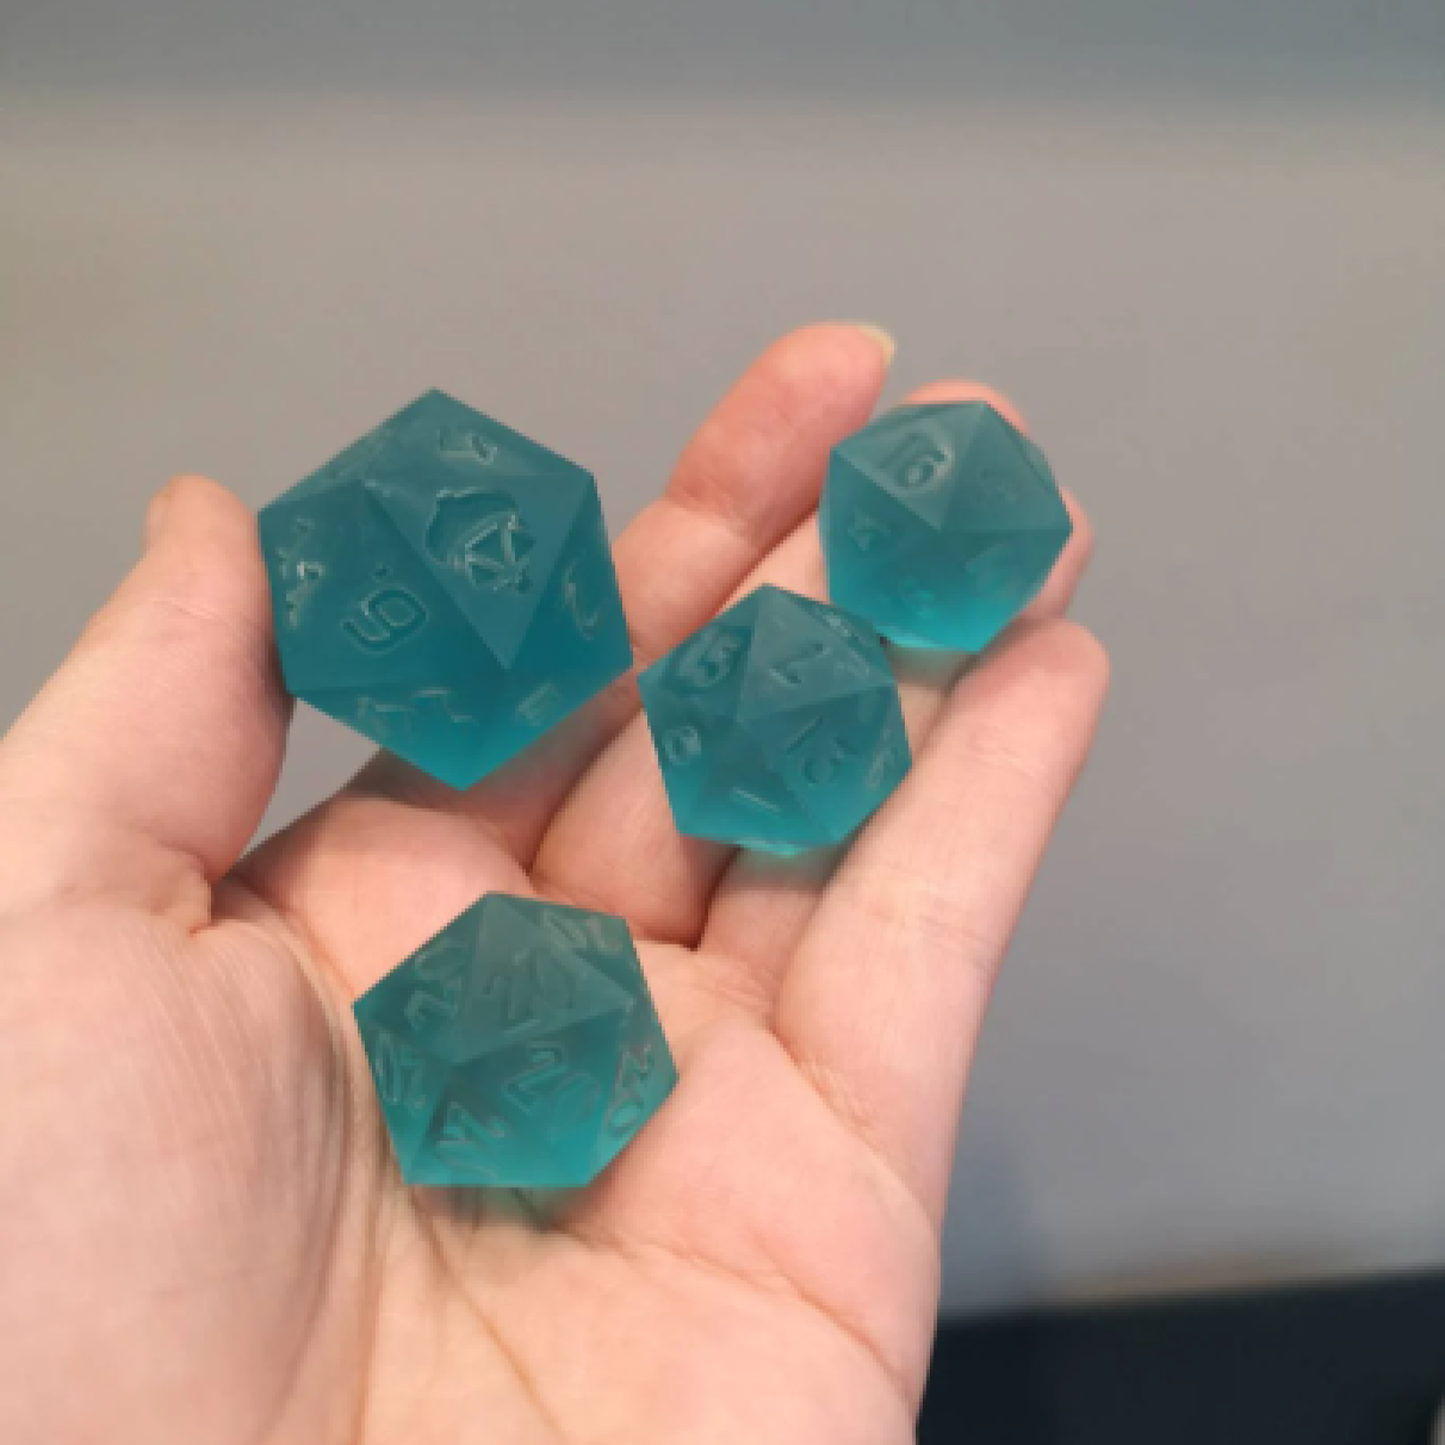 D20 Master Dice - All Sizes